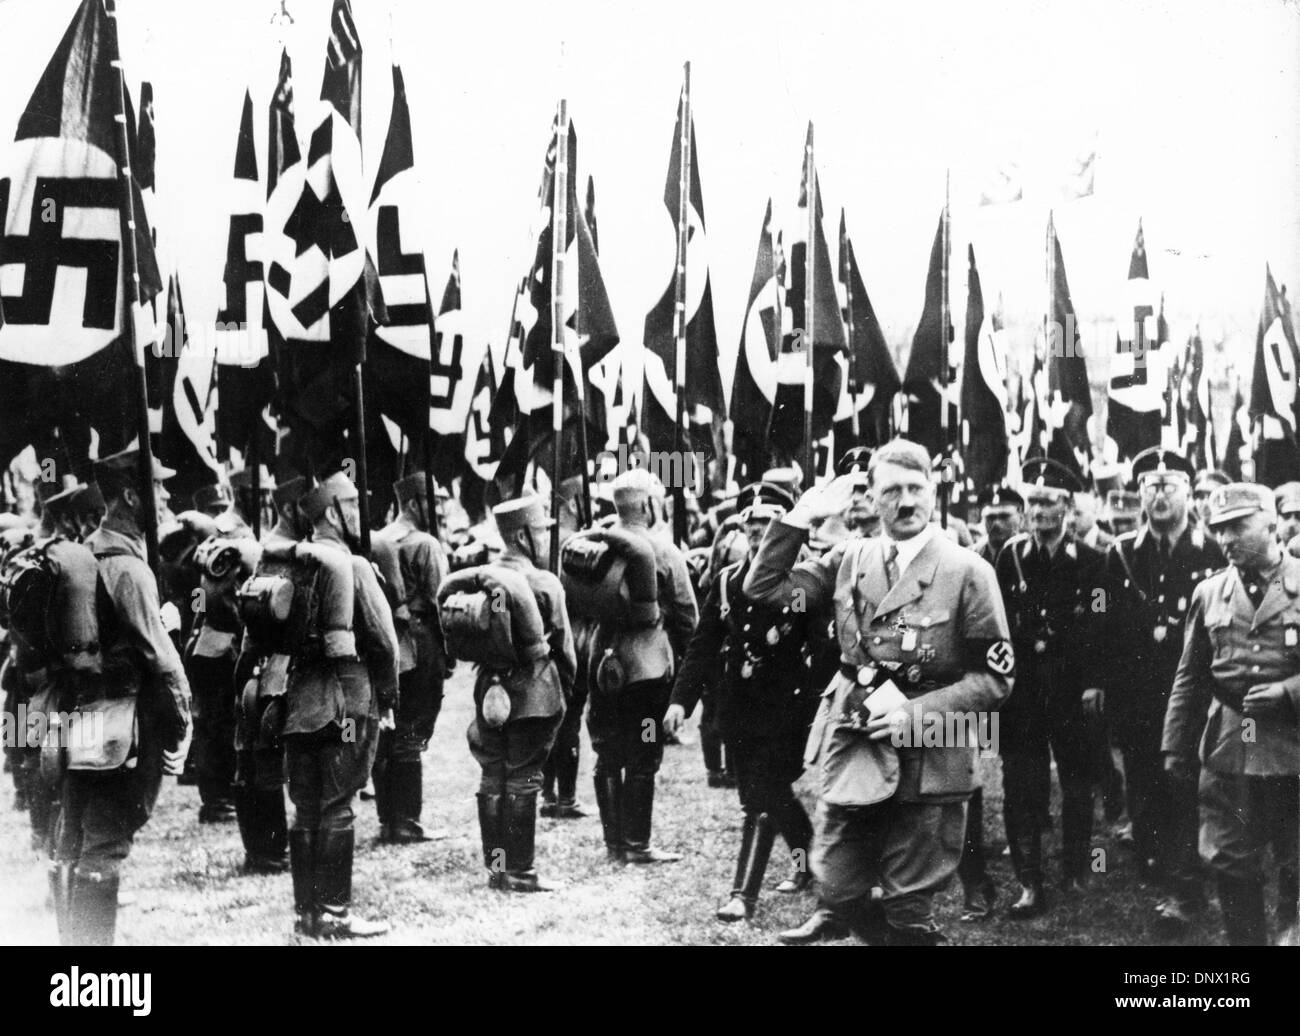 May 1, 1933 - Nuremberg, Germany - Nazi leader and Fuhrer of Germany, ADOLF HITLER leading a war march in Nuremberg, Germany. (Credit Image: © KEYSTONE Pictures USA/ZUMAPRESS.com) Stock Photo